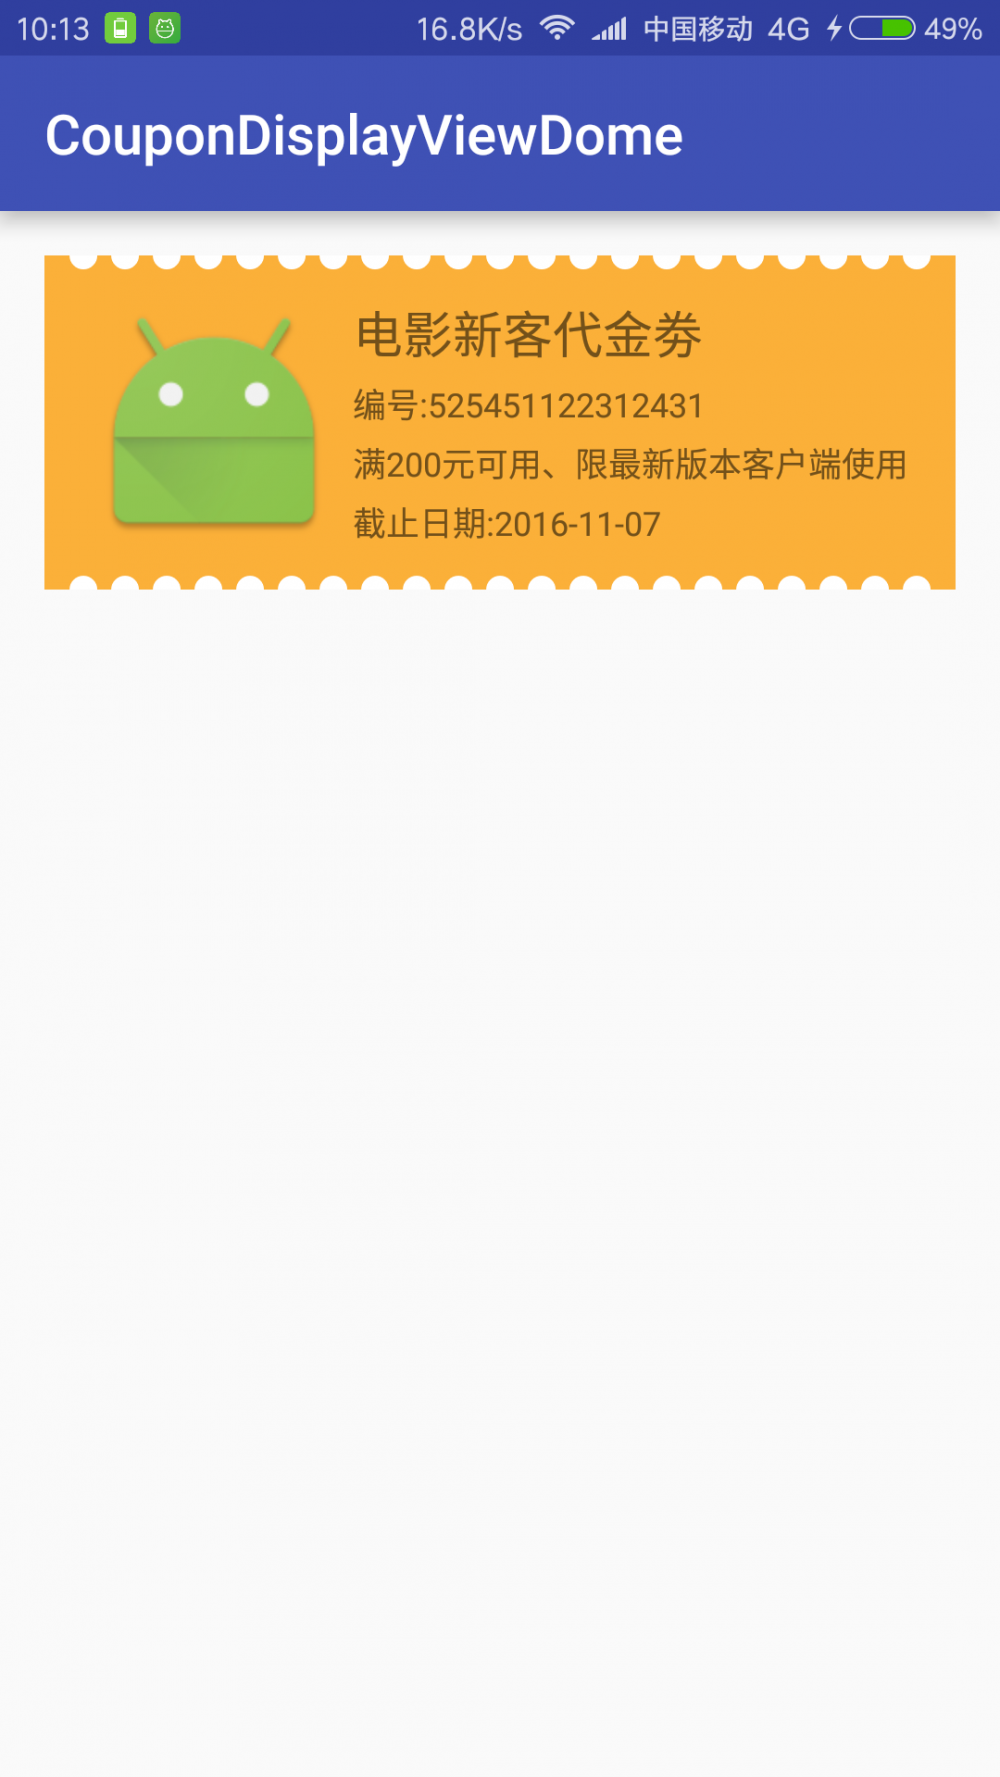 Android 自定义View之边缘凹凸的优惠券效果